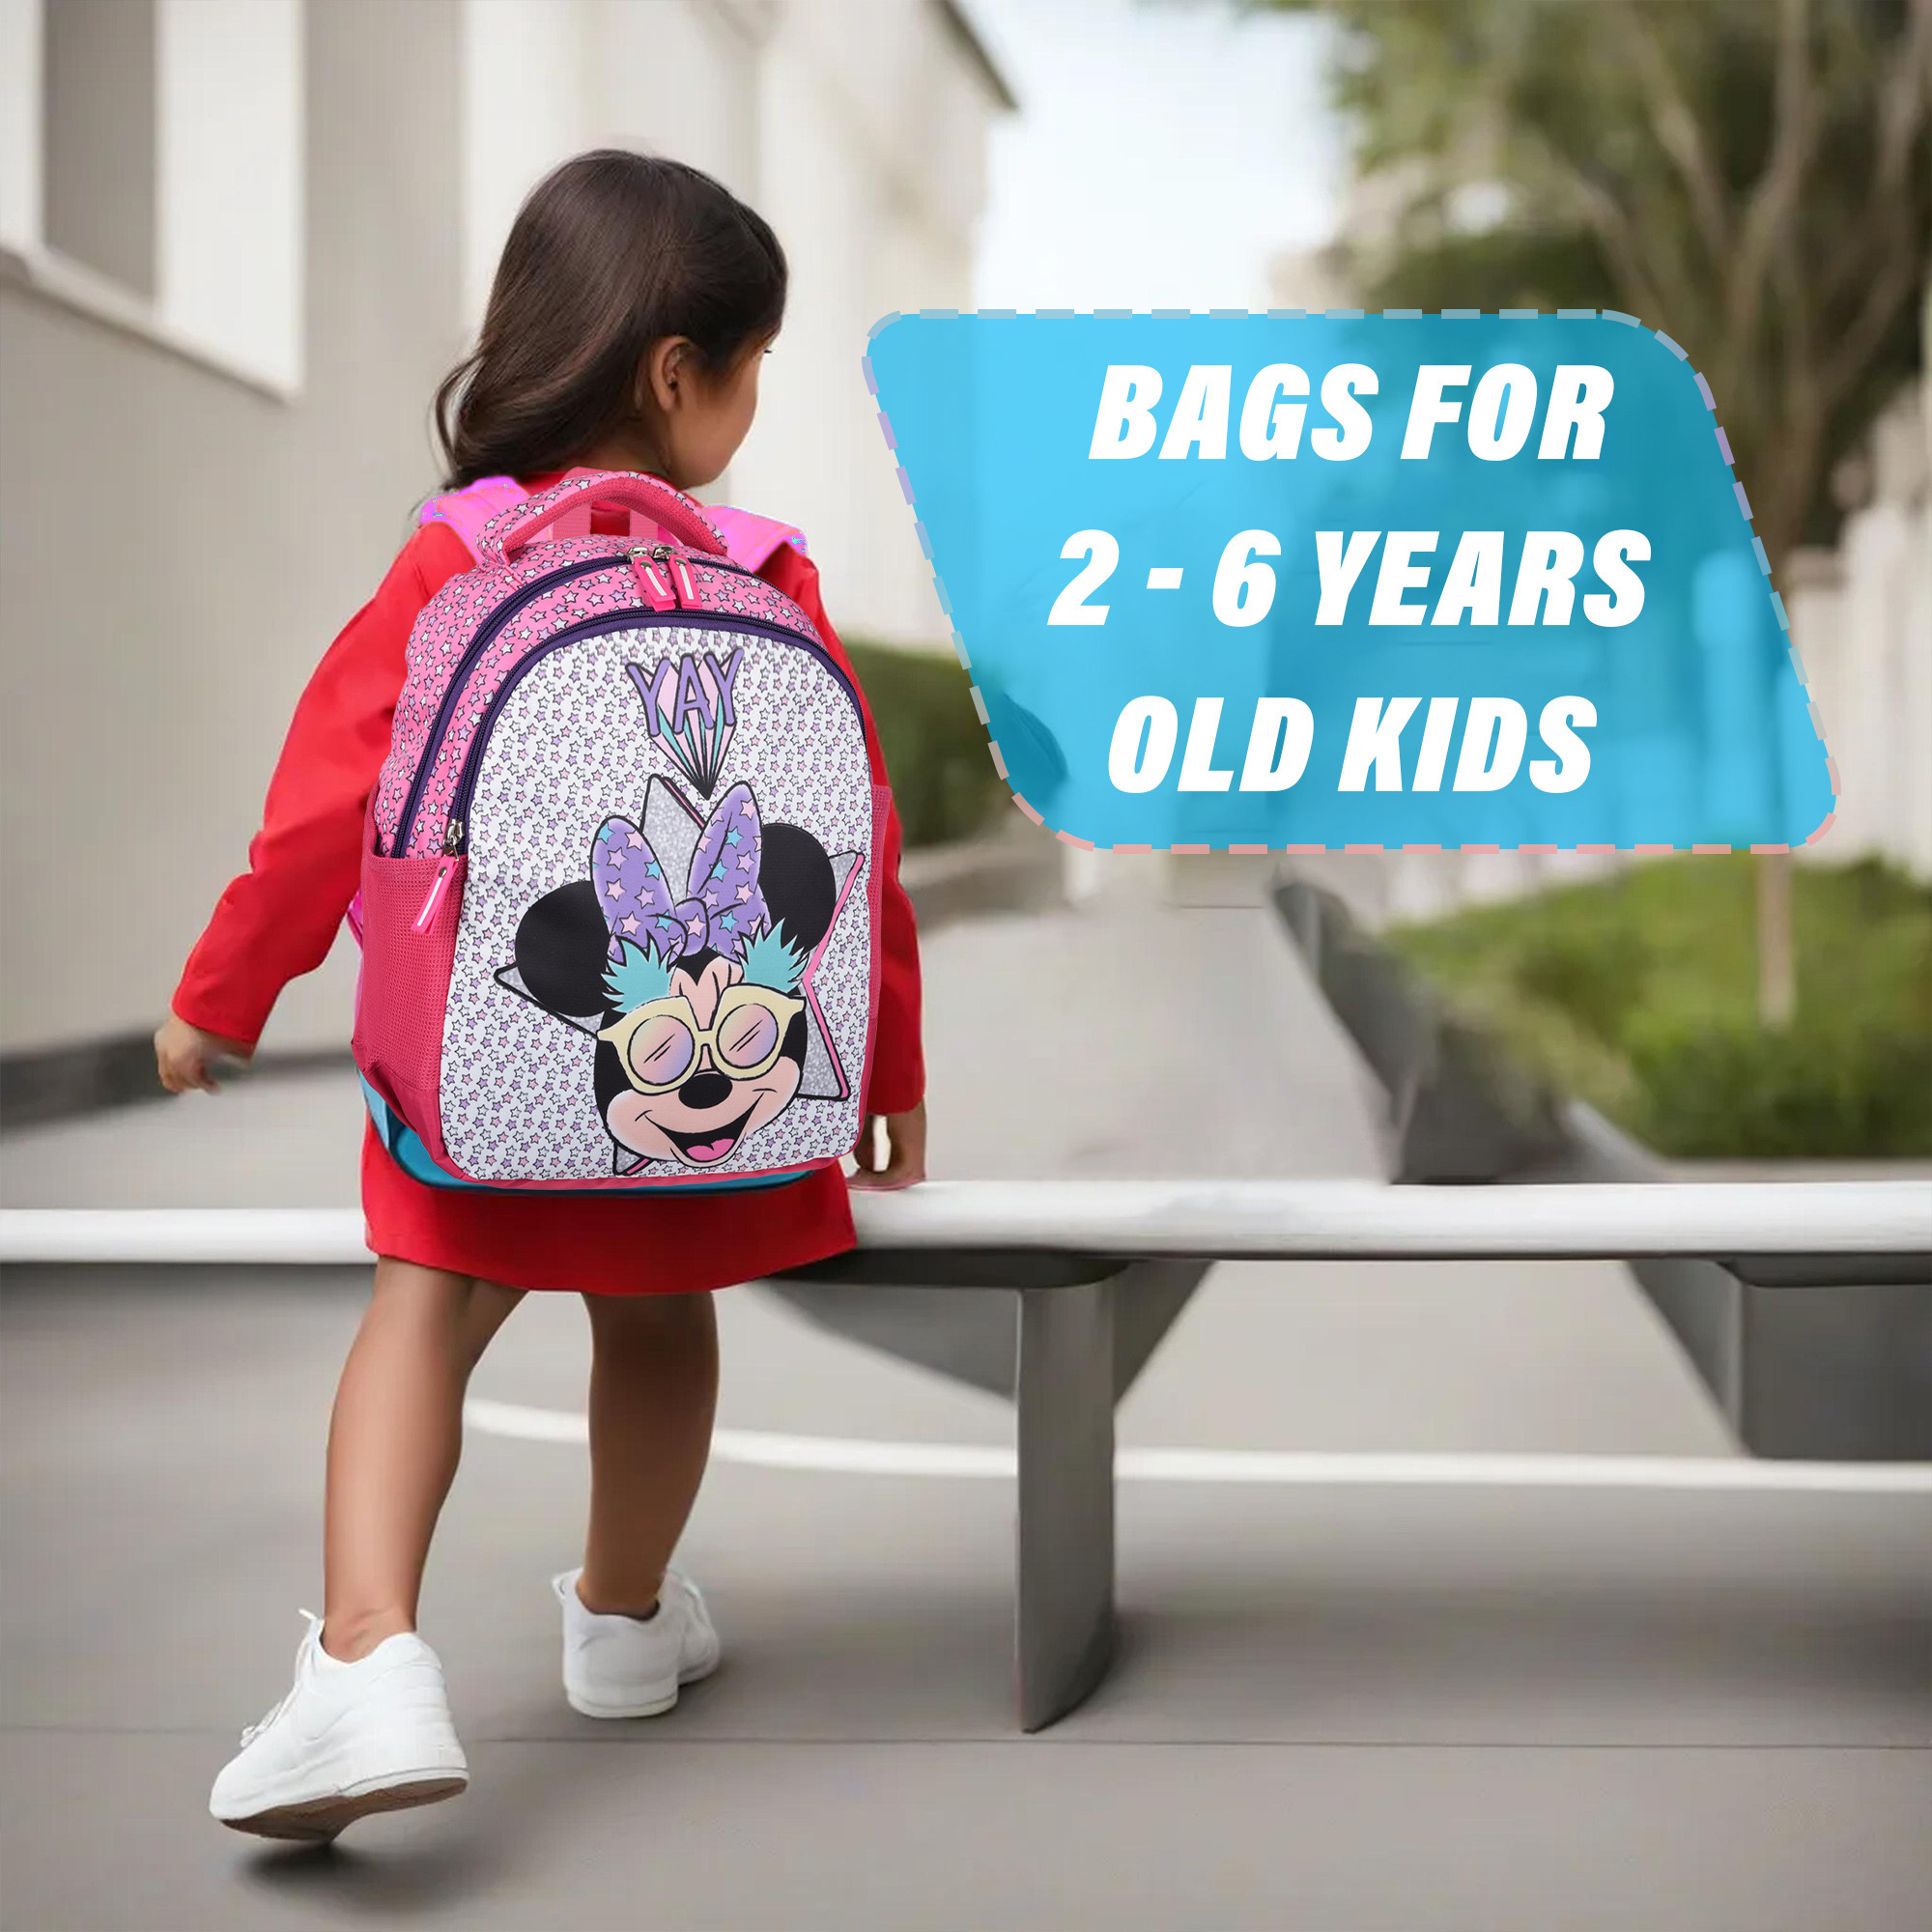 Kuber Industries Disney Minnie Star Backpack | School Backpack for Kids | College Backpack | School Bag for Boys & Girls | 3 Compartments School Backpack | Spacious & Multiple Pockets | Pink